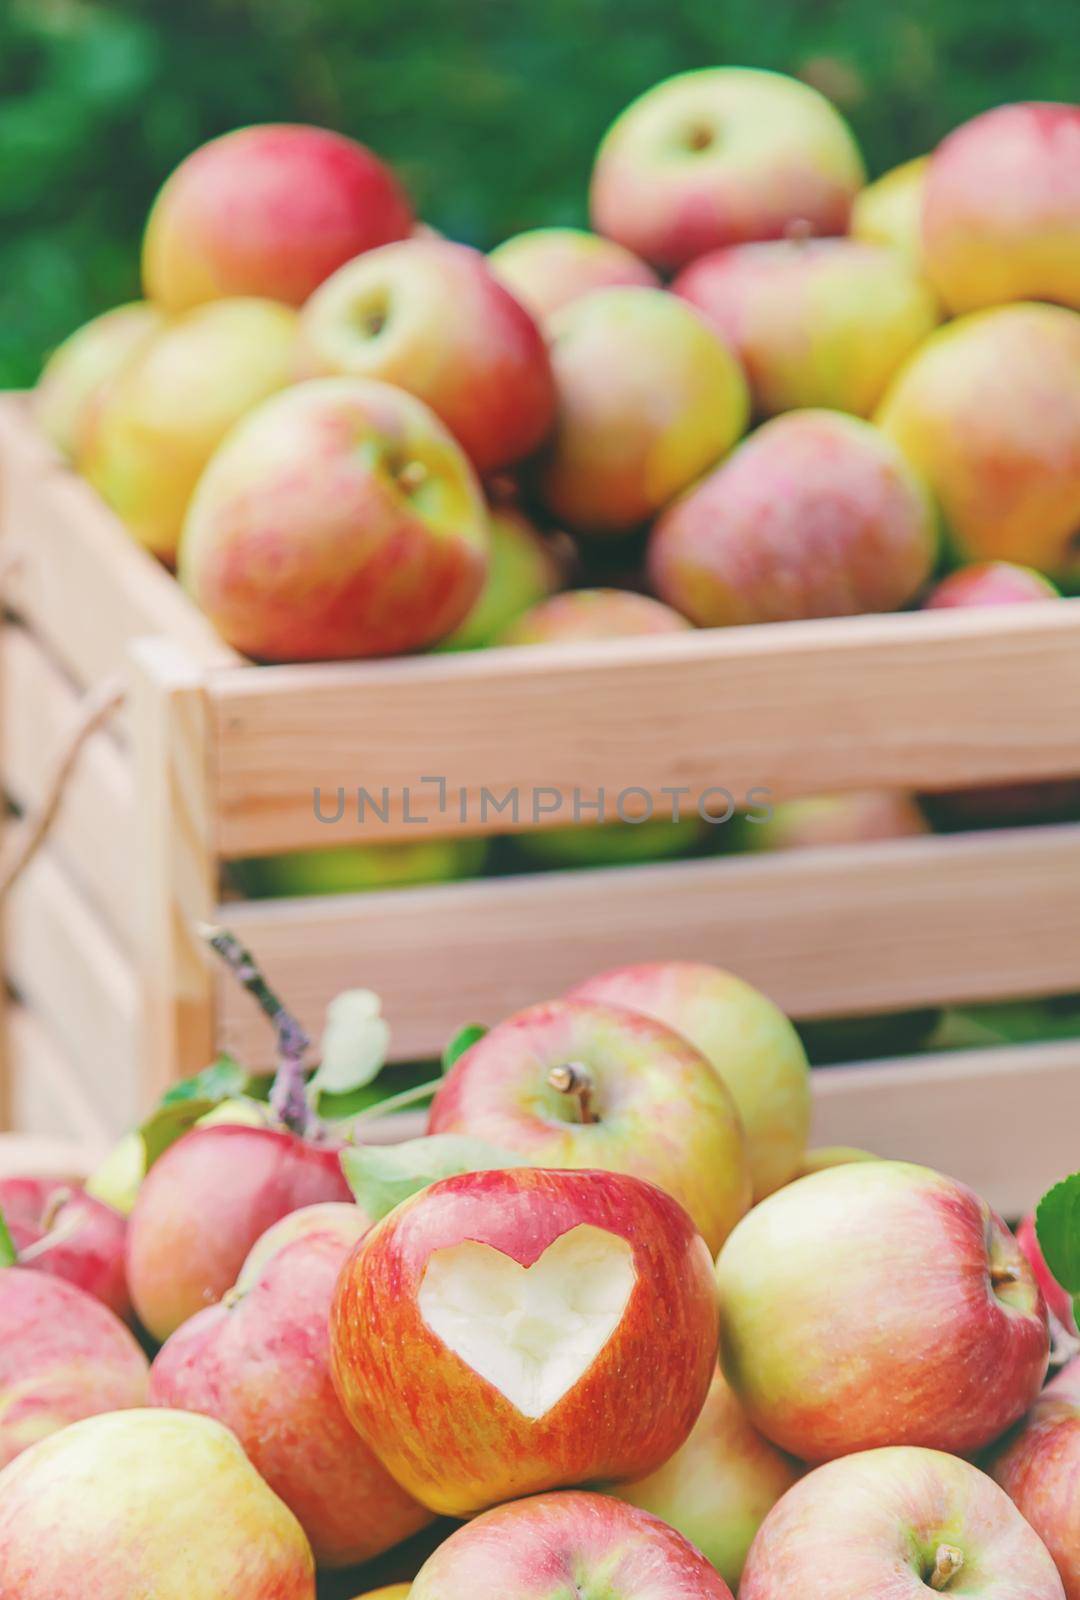 Harvest apples in a box on a tree in the garden. Selective focus. nature.